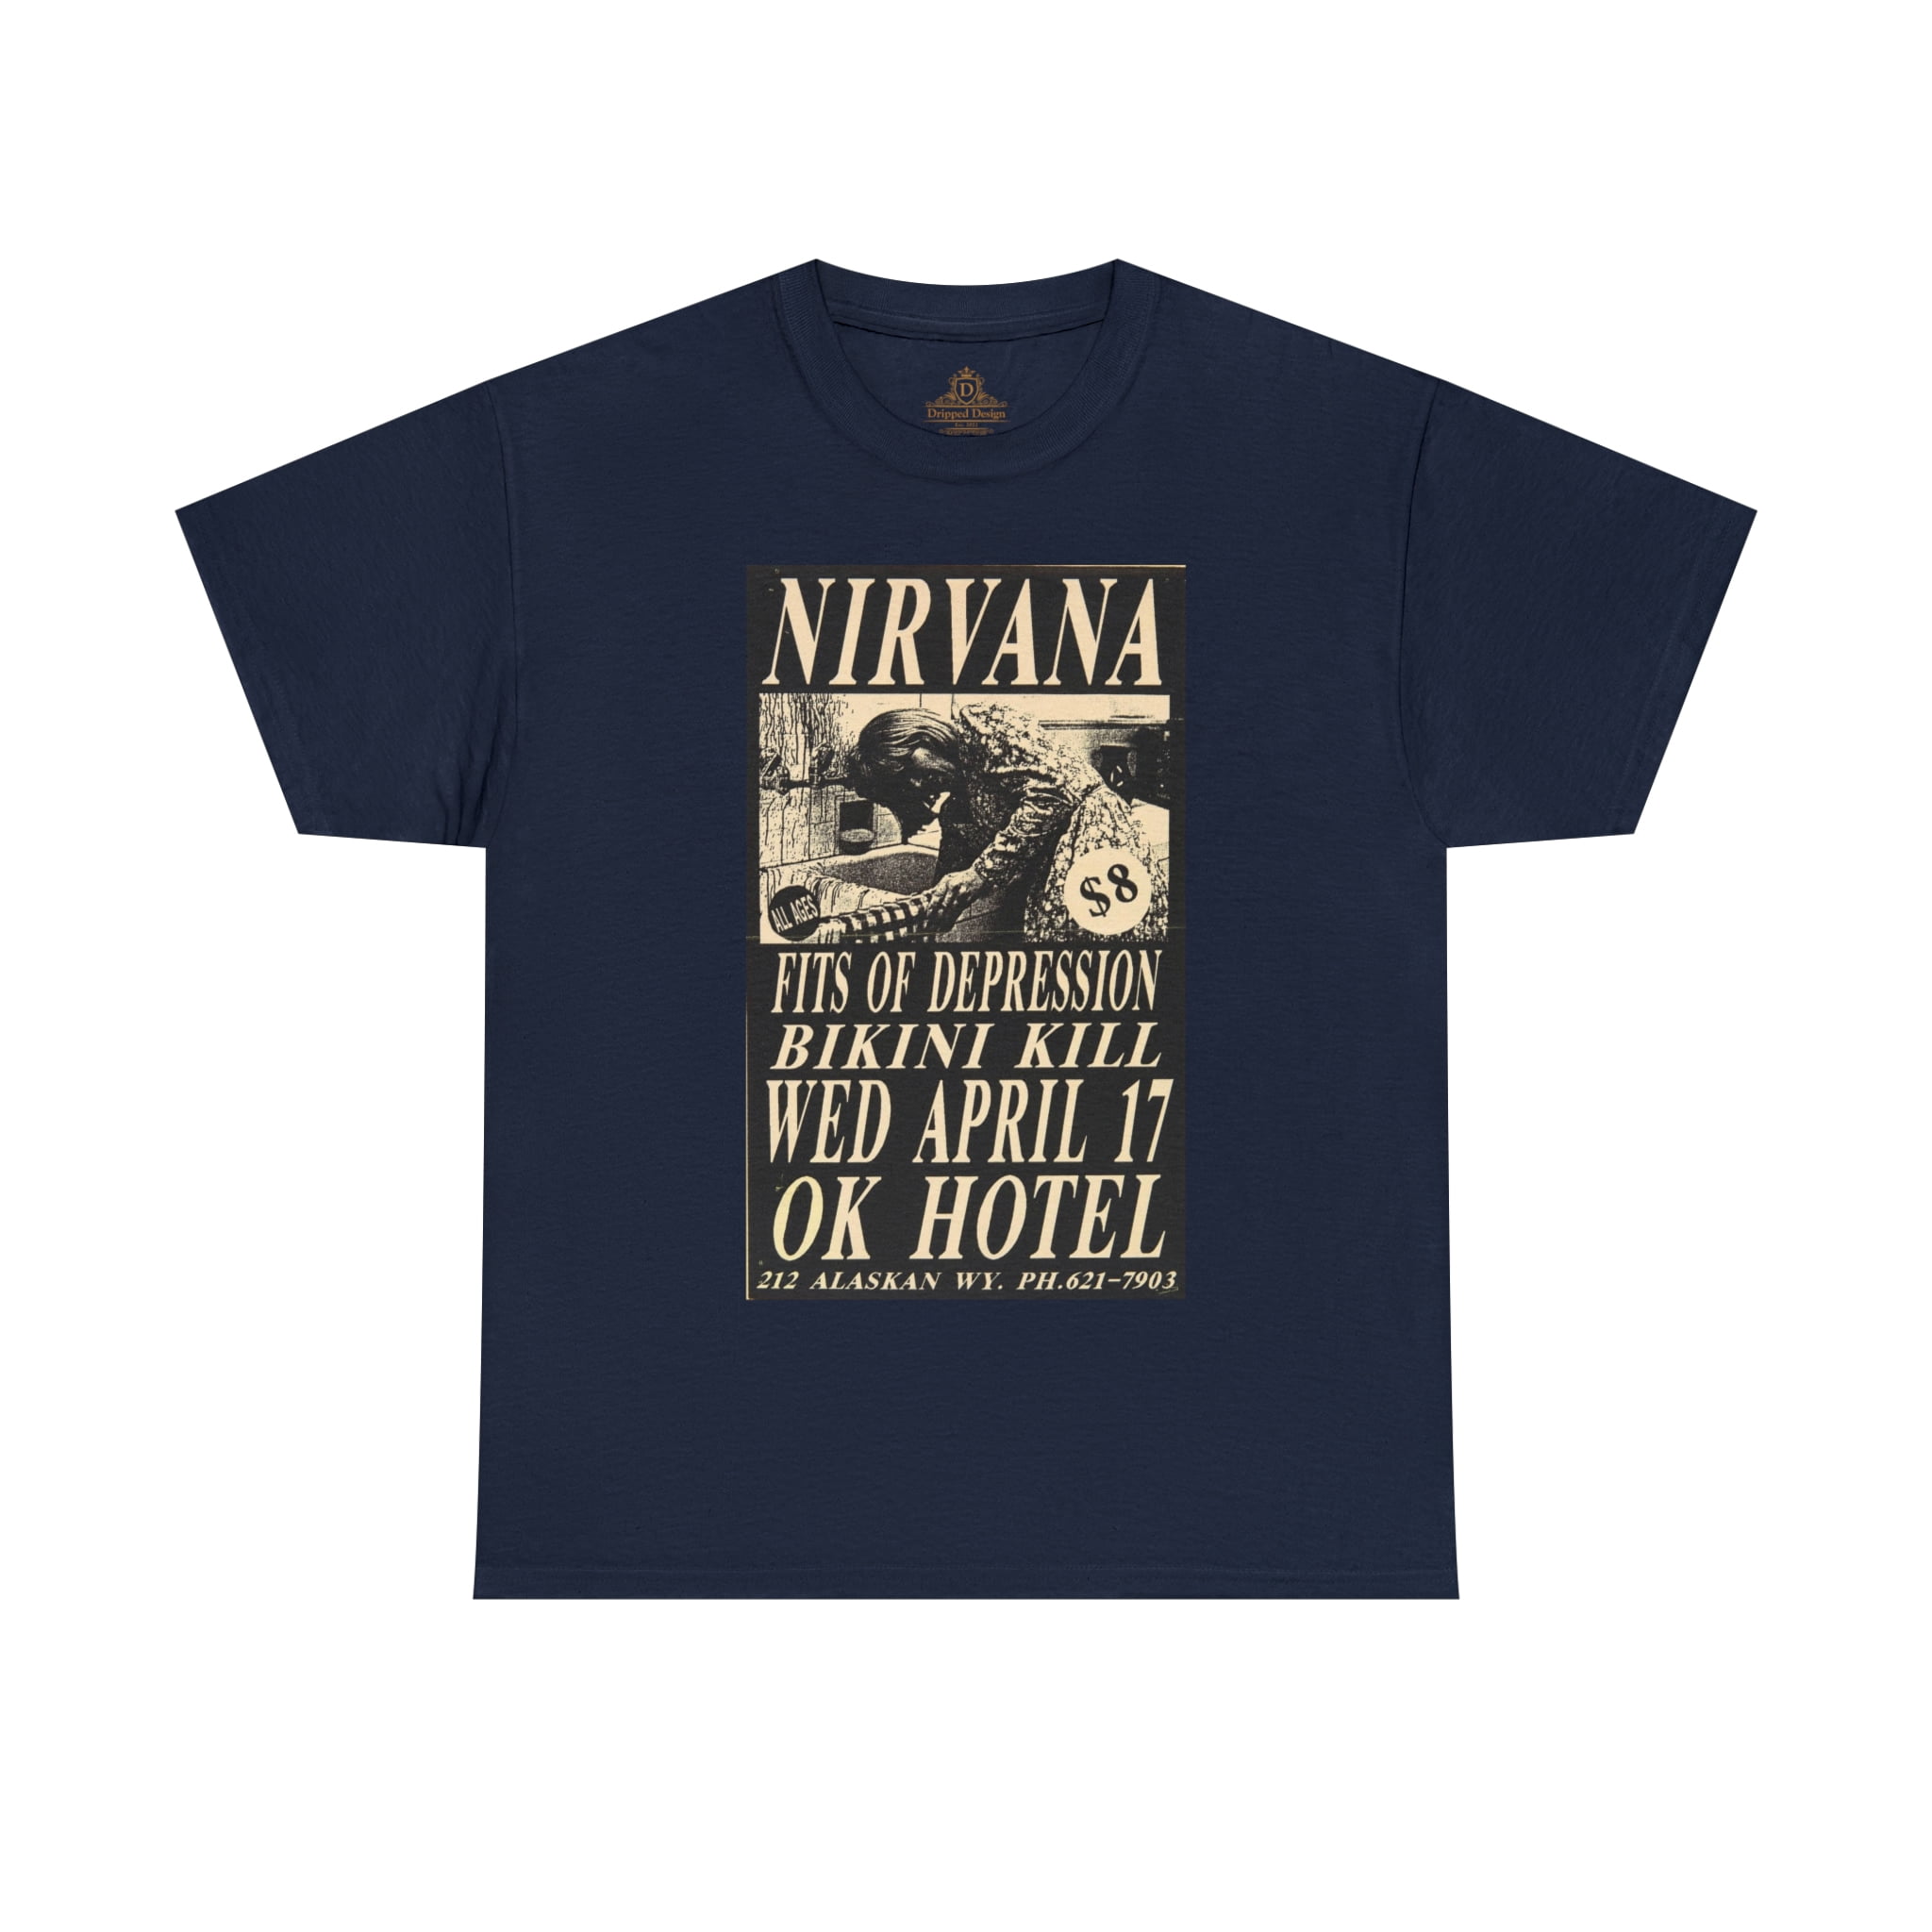 Nirvana shirts are preppy now: An Xennial writer comes to terms